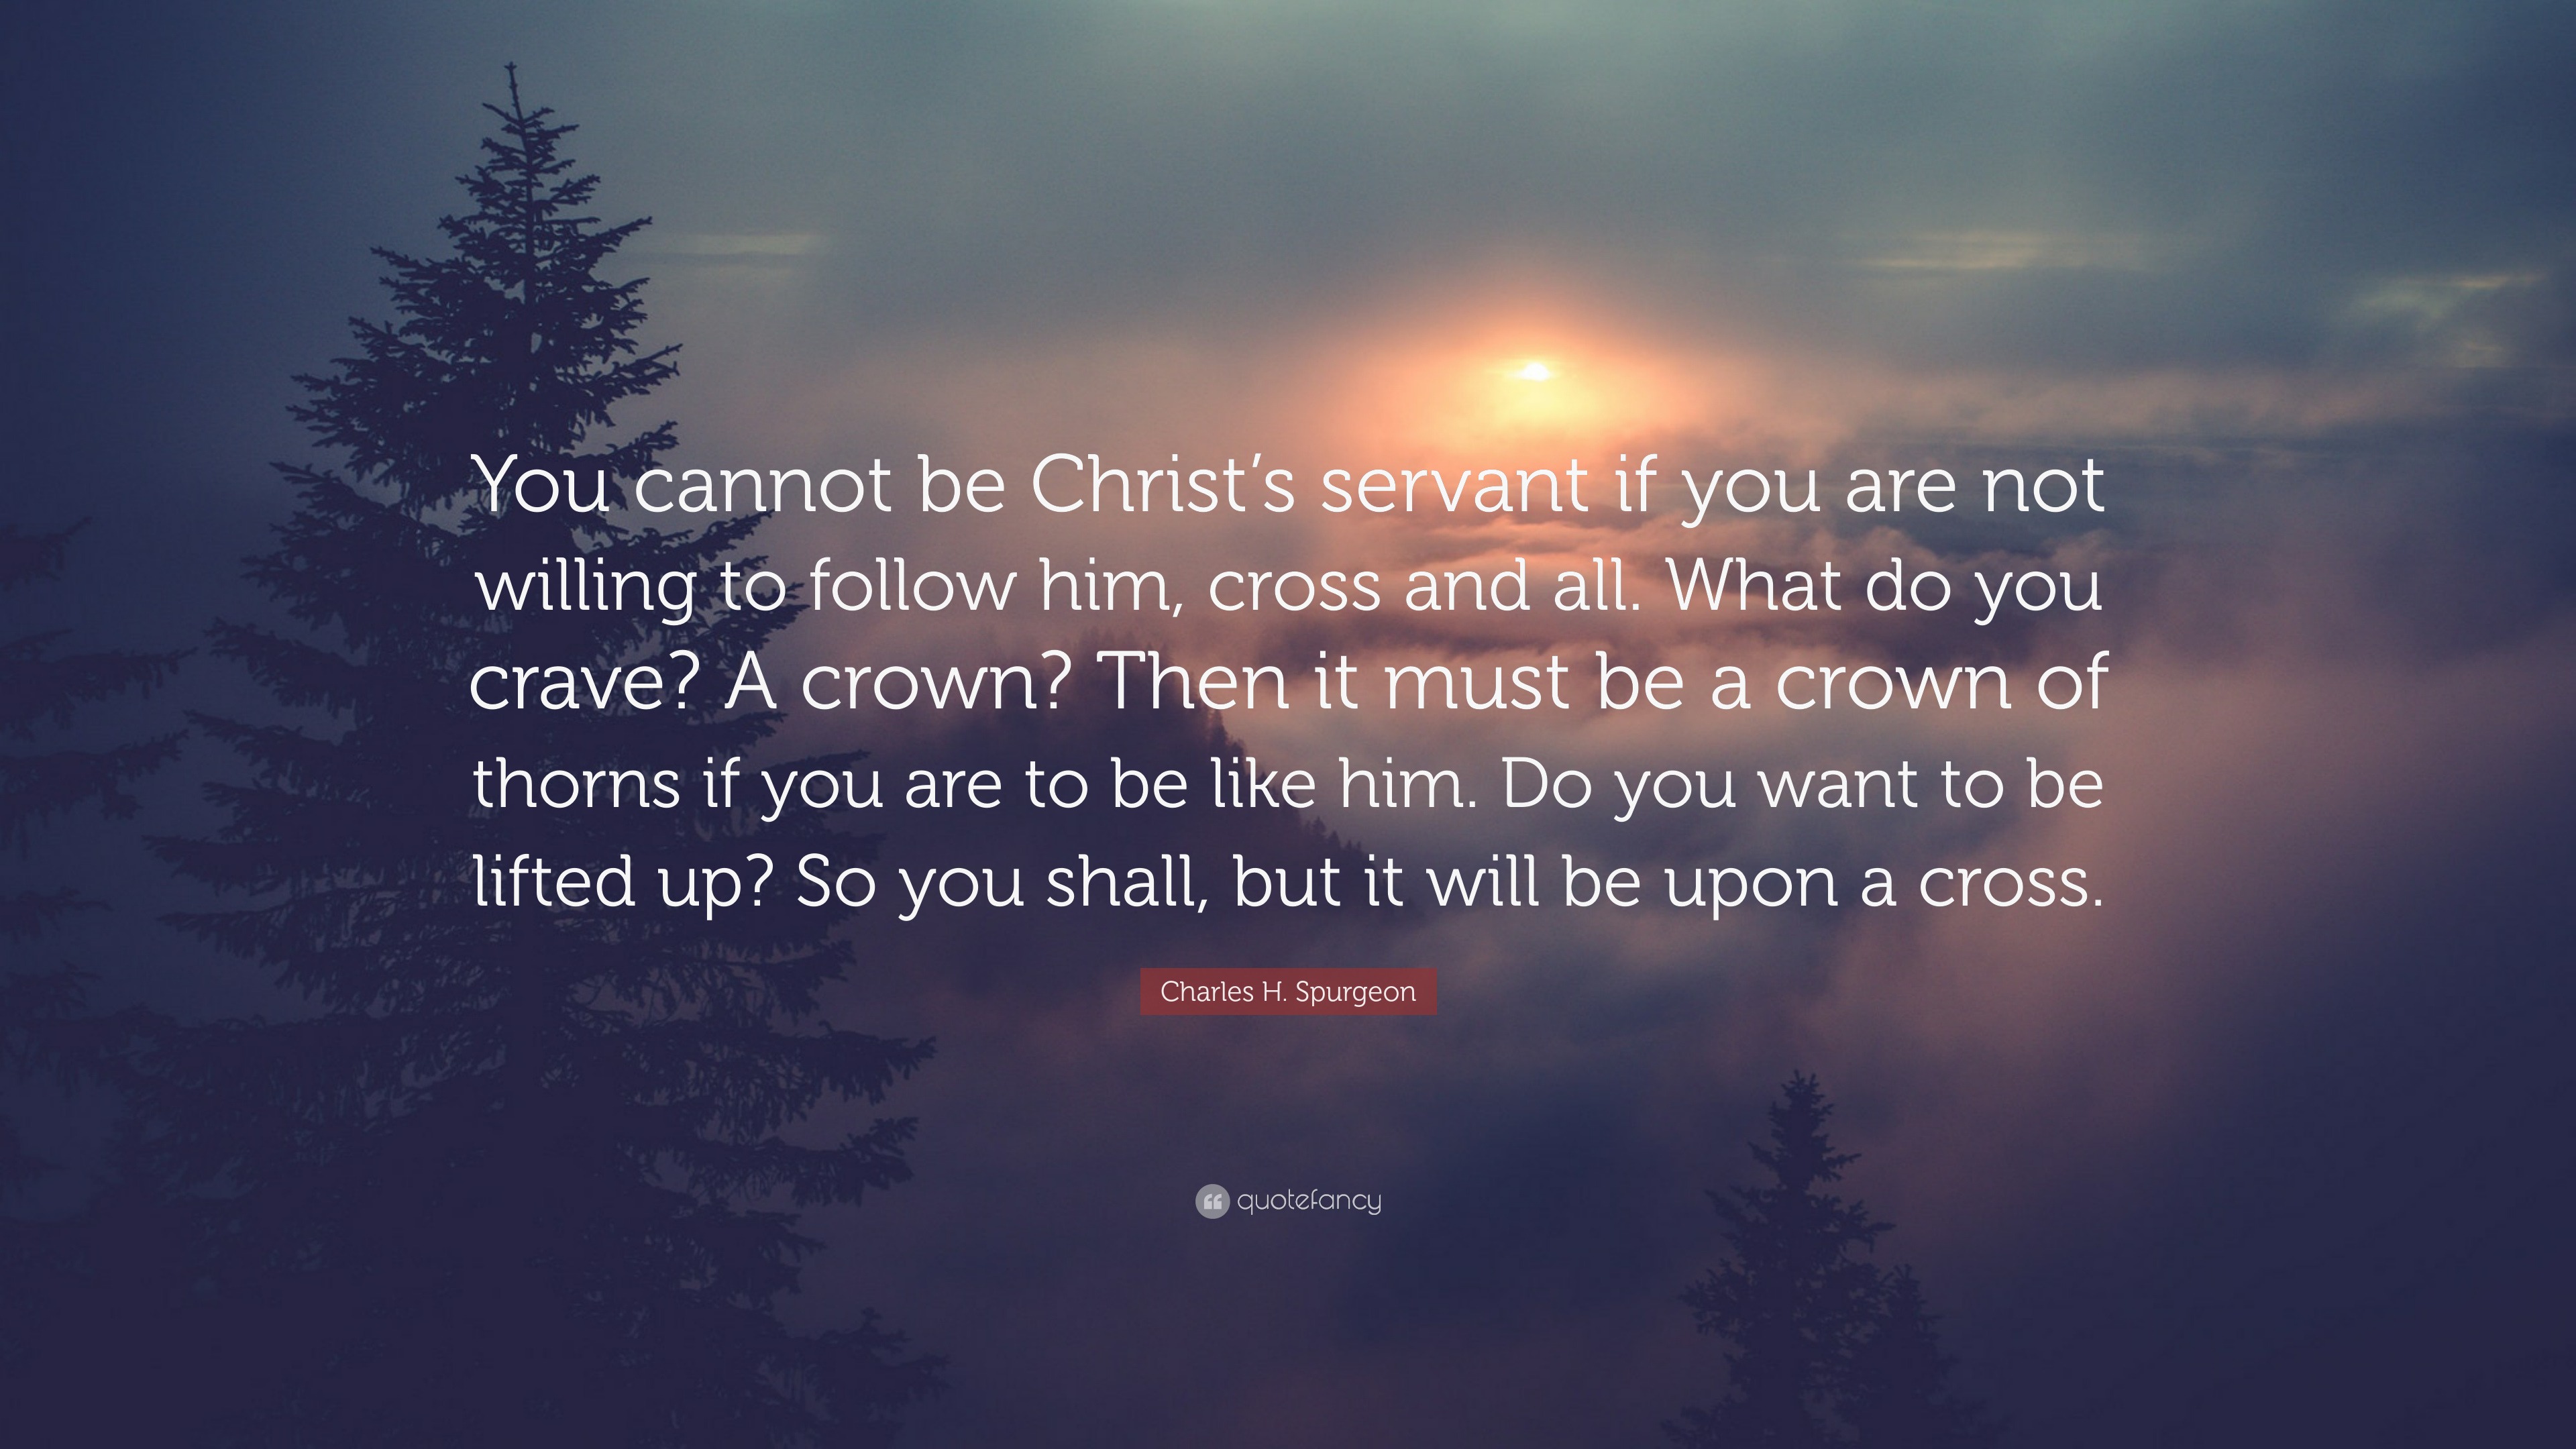 Charles H. Spurgeon Quote: “You cannot be Christ’s servant if you are ...